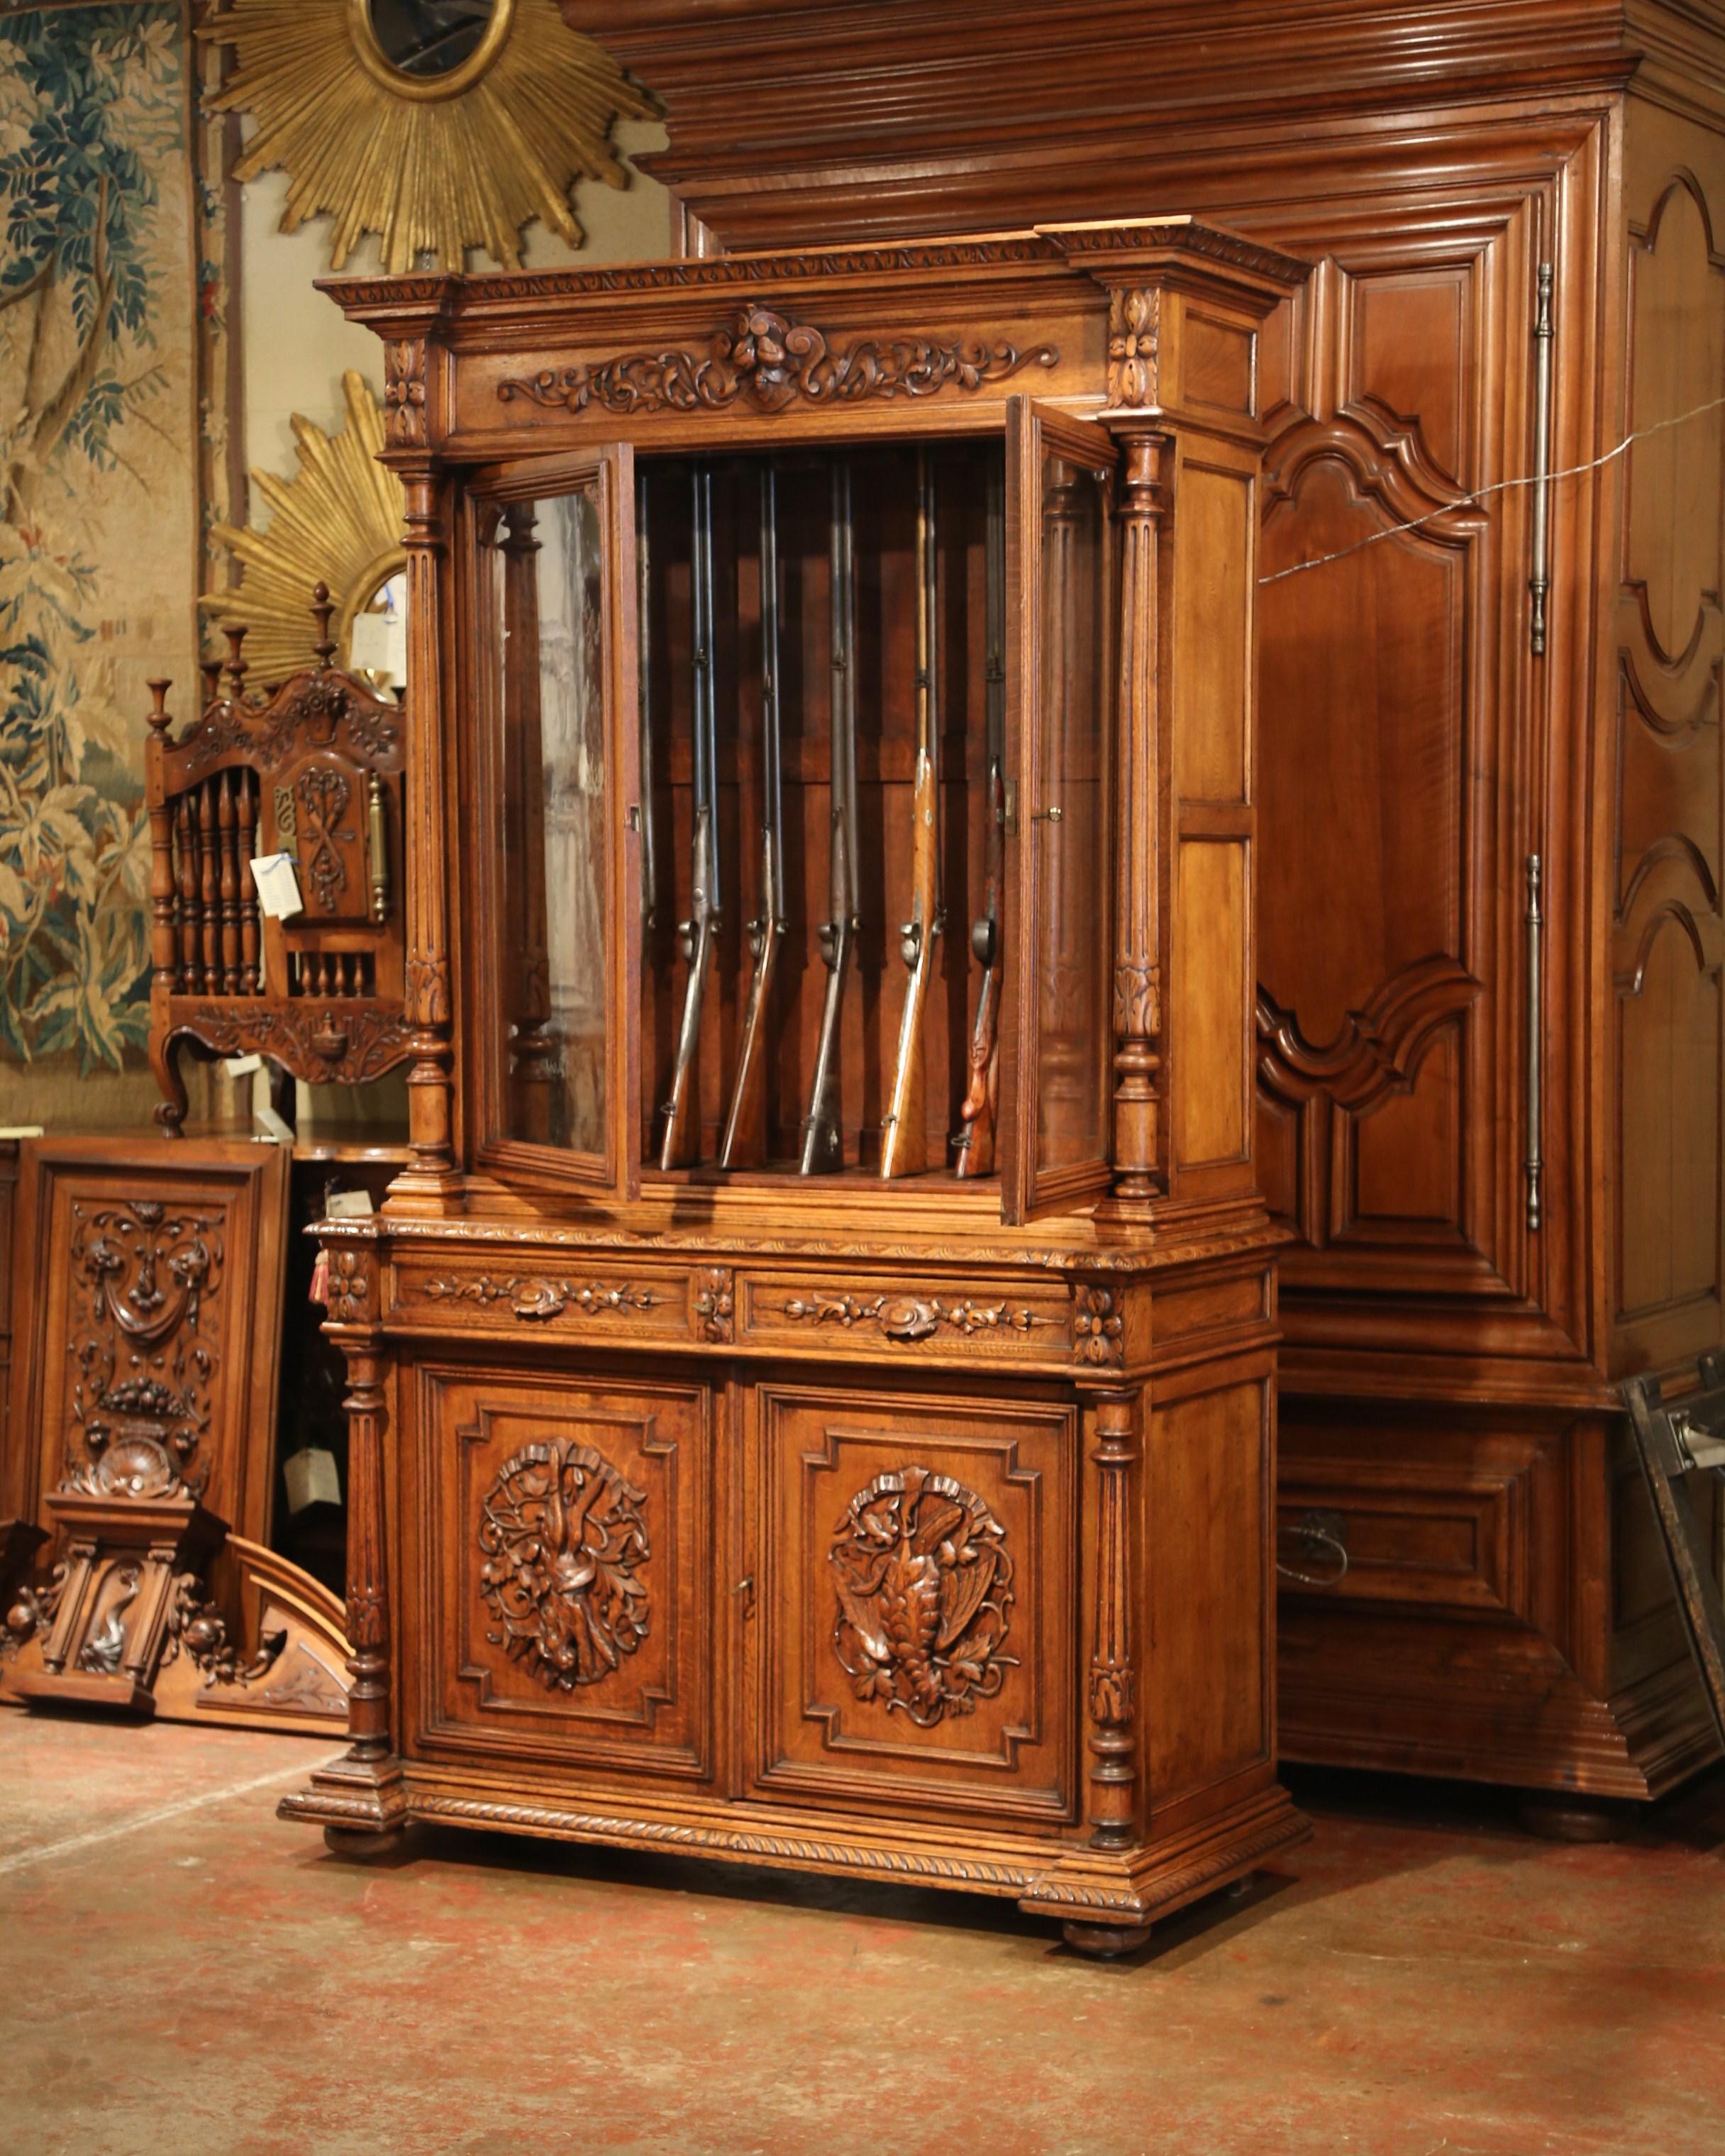 Store your rifle collection inside this beautifully carved, antique gun display cabinet. Created in France circa 1880, the two-piece buffet will hold up to nine guns. The cabinet has a pair of doors with original glass across the front, which are